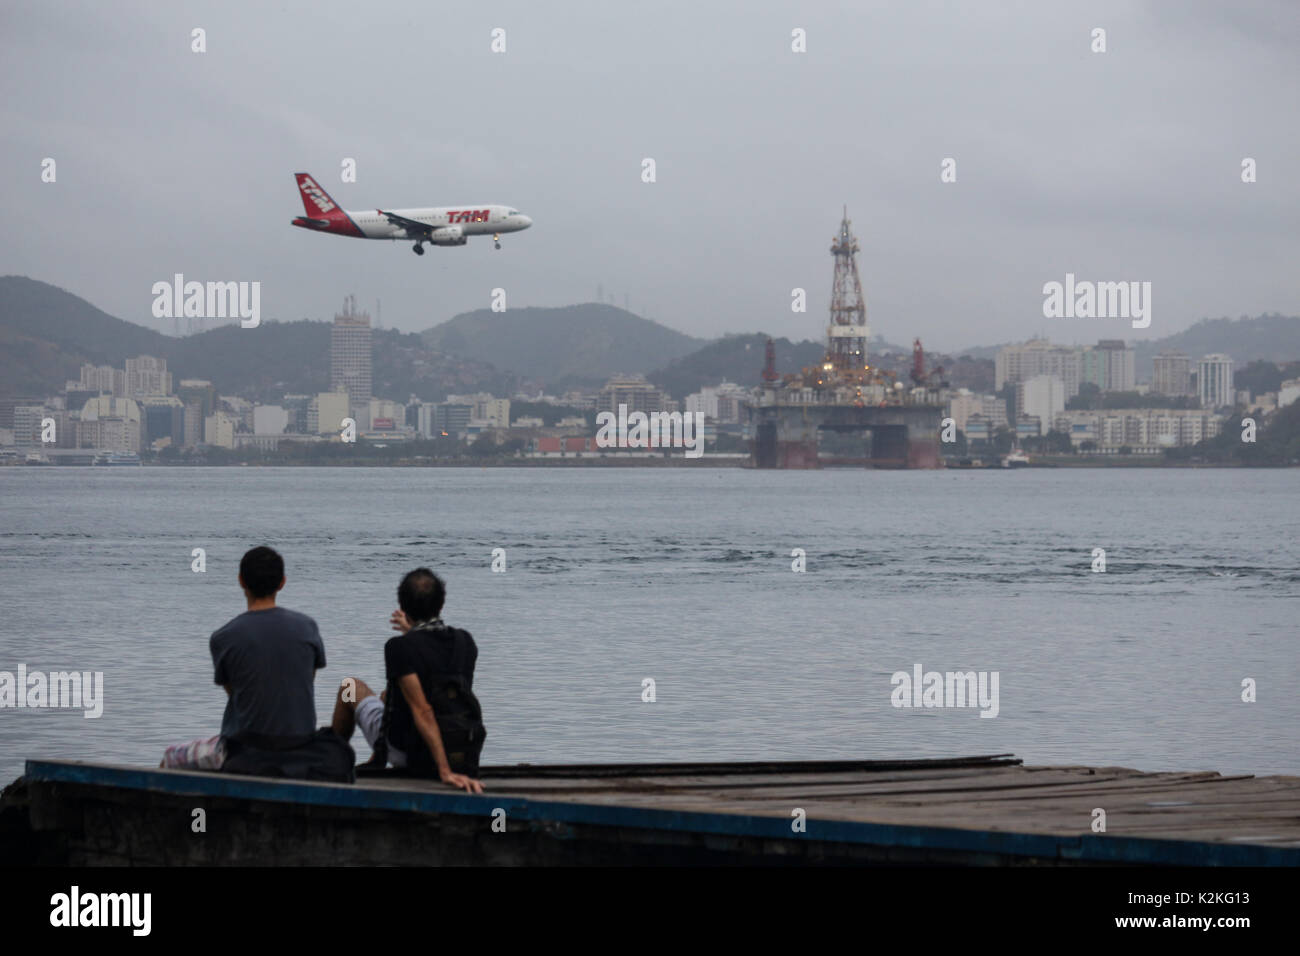 Rio de Janeiro, Brazil, August 31, 2017: End of August is marked by falling temperatures in the city of Rio de Janeiro. The thermometers marked below 20 degrees celsius. In this image men watch a plane from Latam flying over the waters of Guanabara Bay on a cold, cloudy day in downtown Rio. Credit: Luiz Souza/Alamy Live News Stock Photo